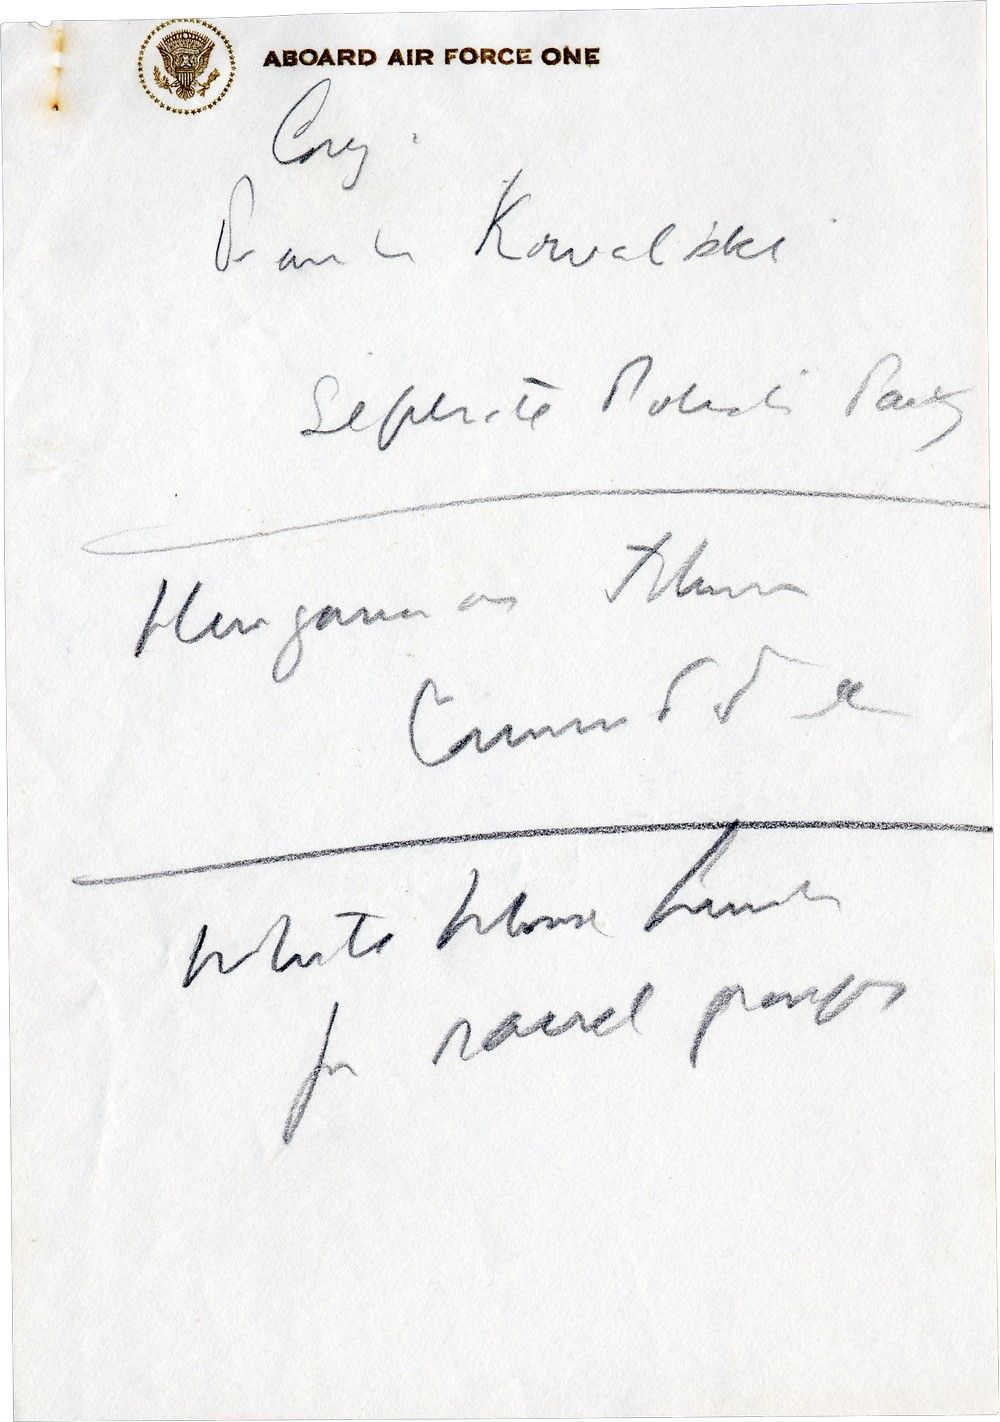 Notes Written by President John F. Kennedy Aboard Air Force One